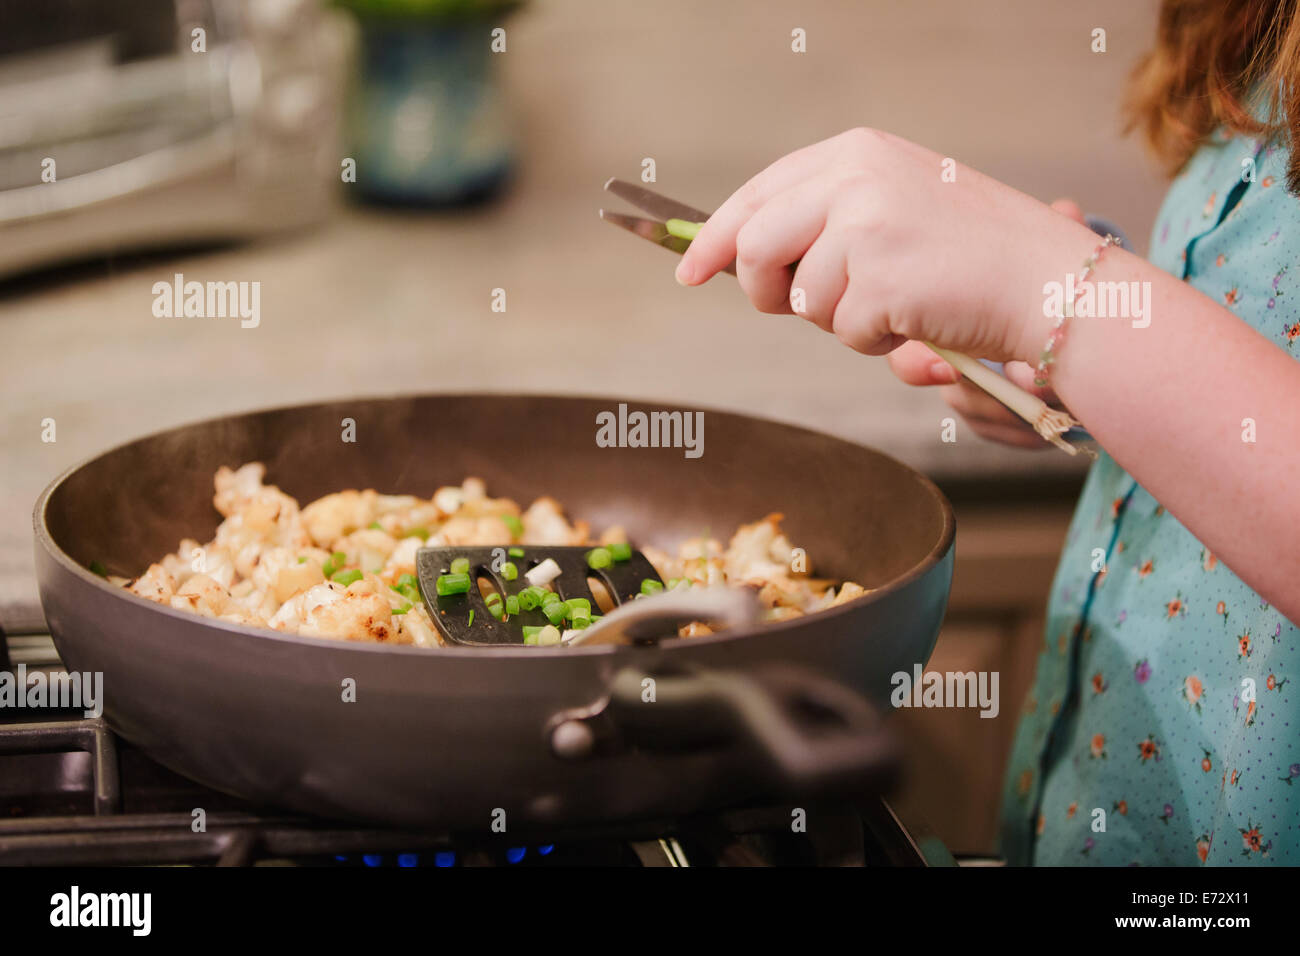 Teenage girl (13-15) cooking in kitchen Stock Photo